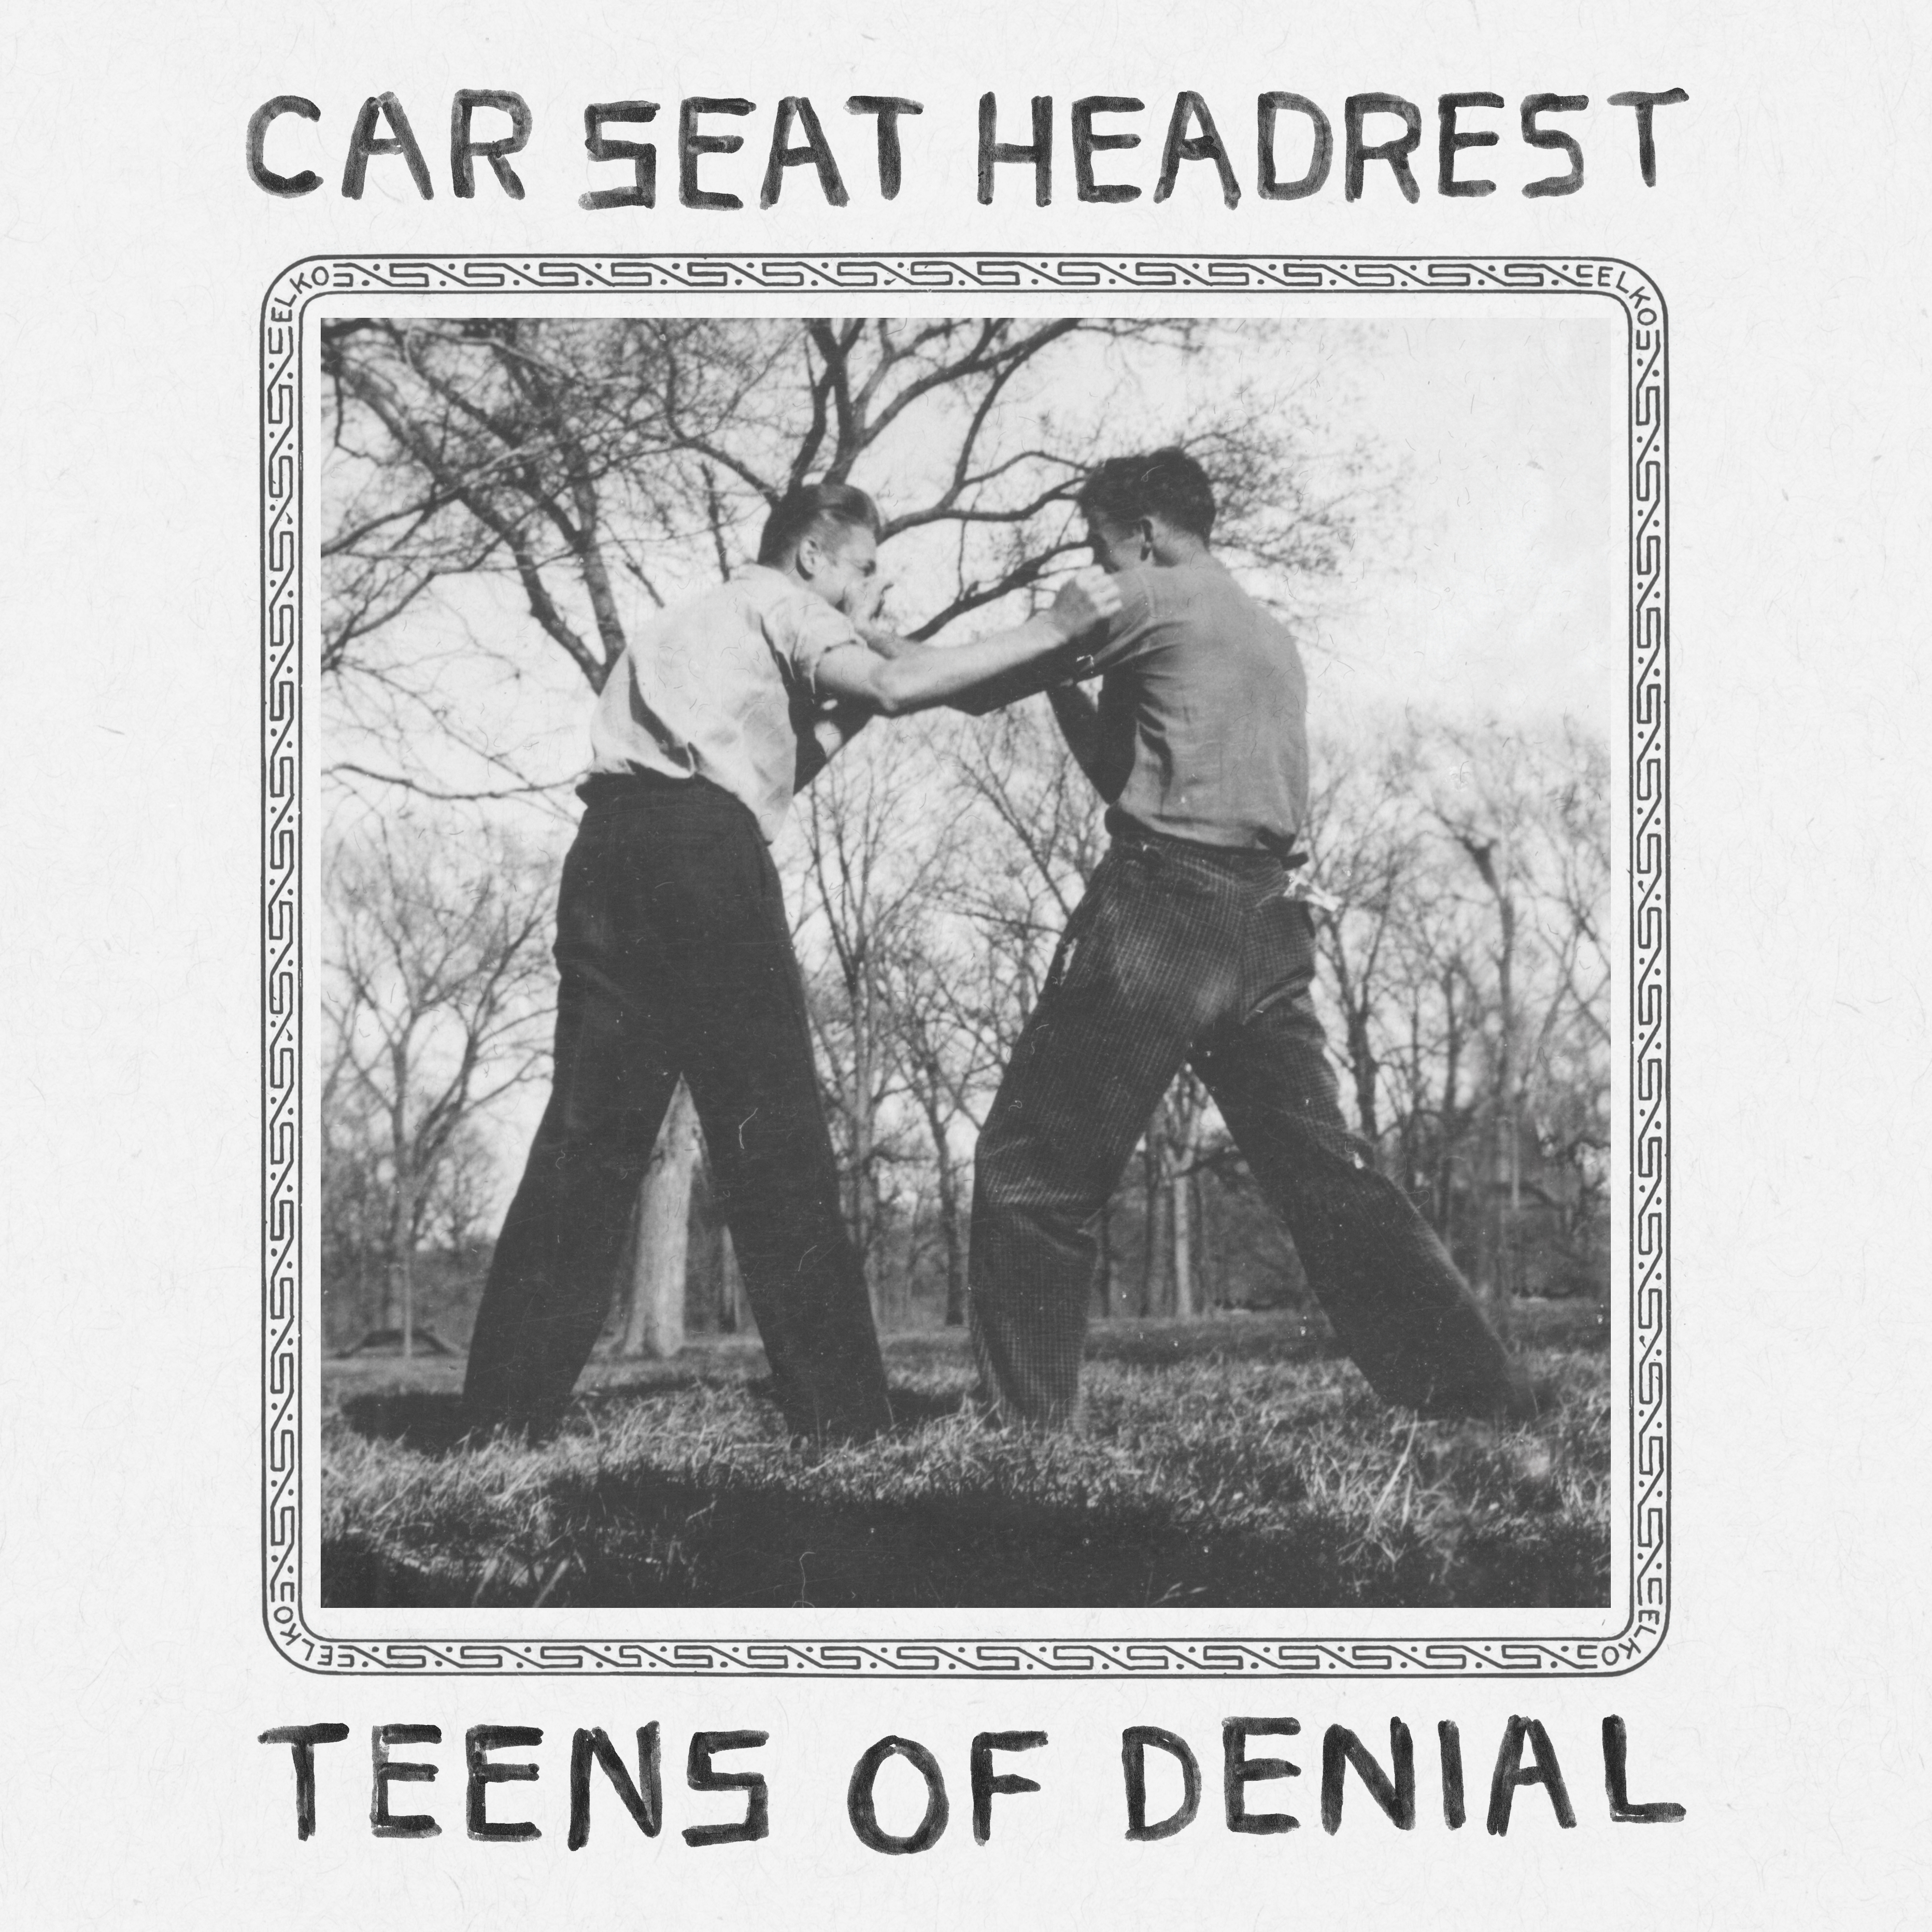 Car Seat Headrest Conquer Graduation Jitters With New Album 'Teens of Denial'